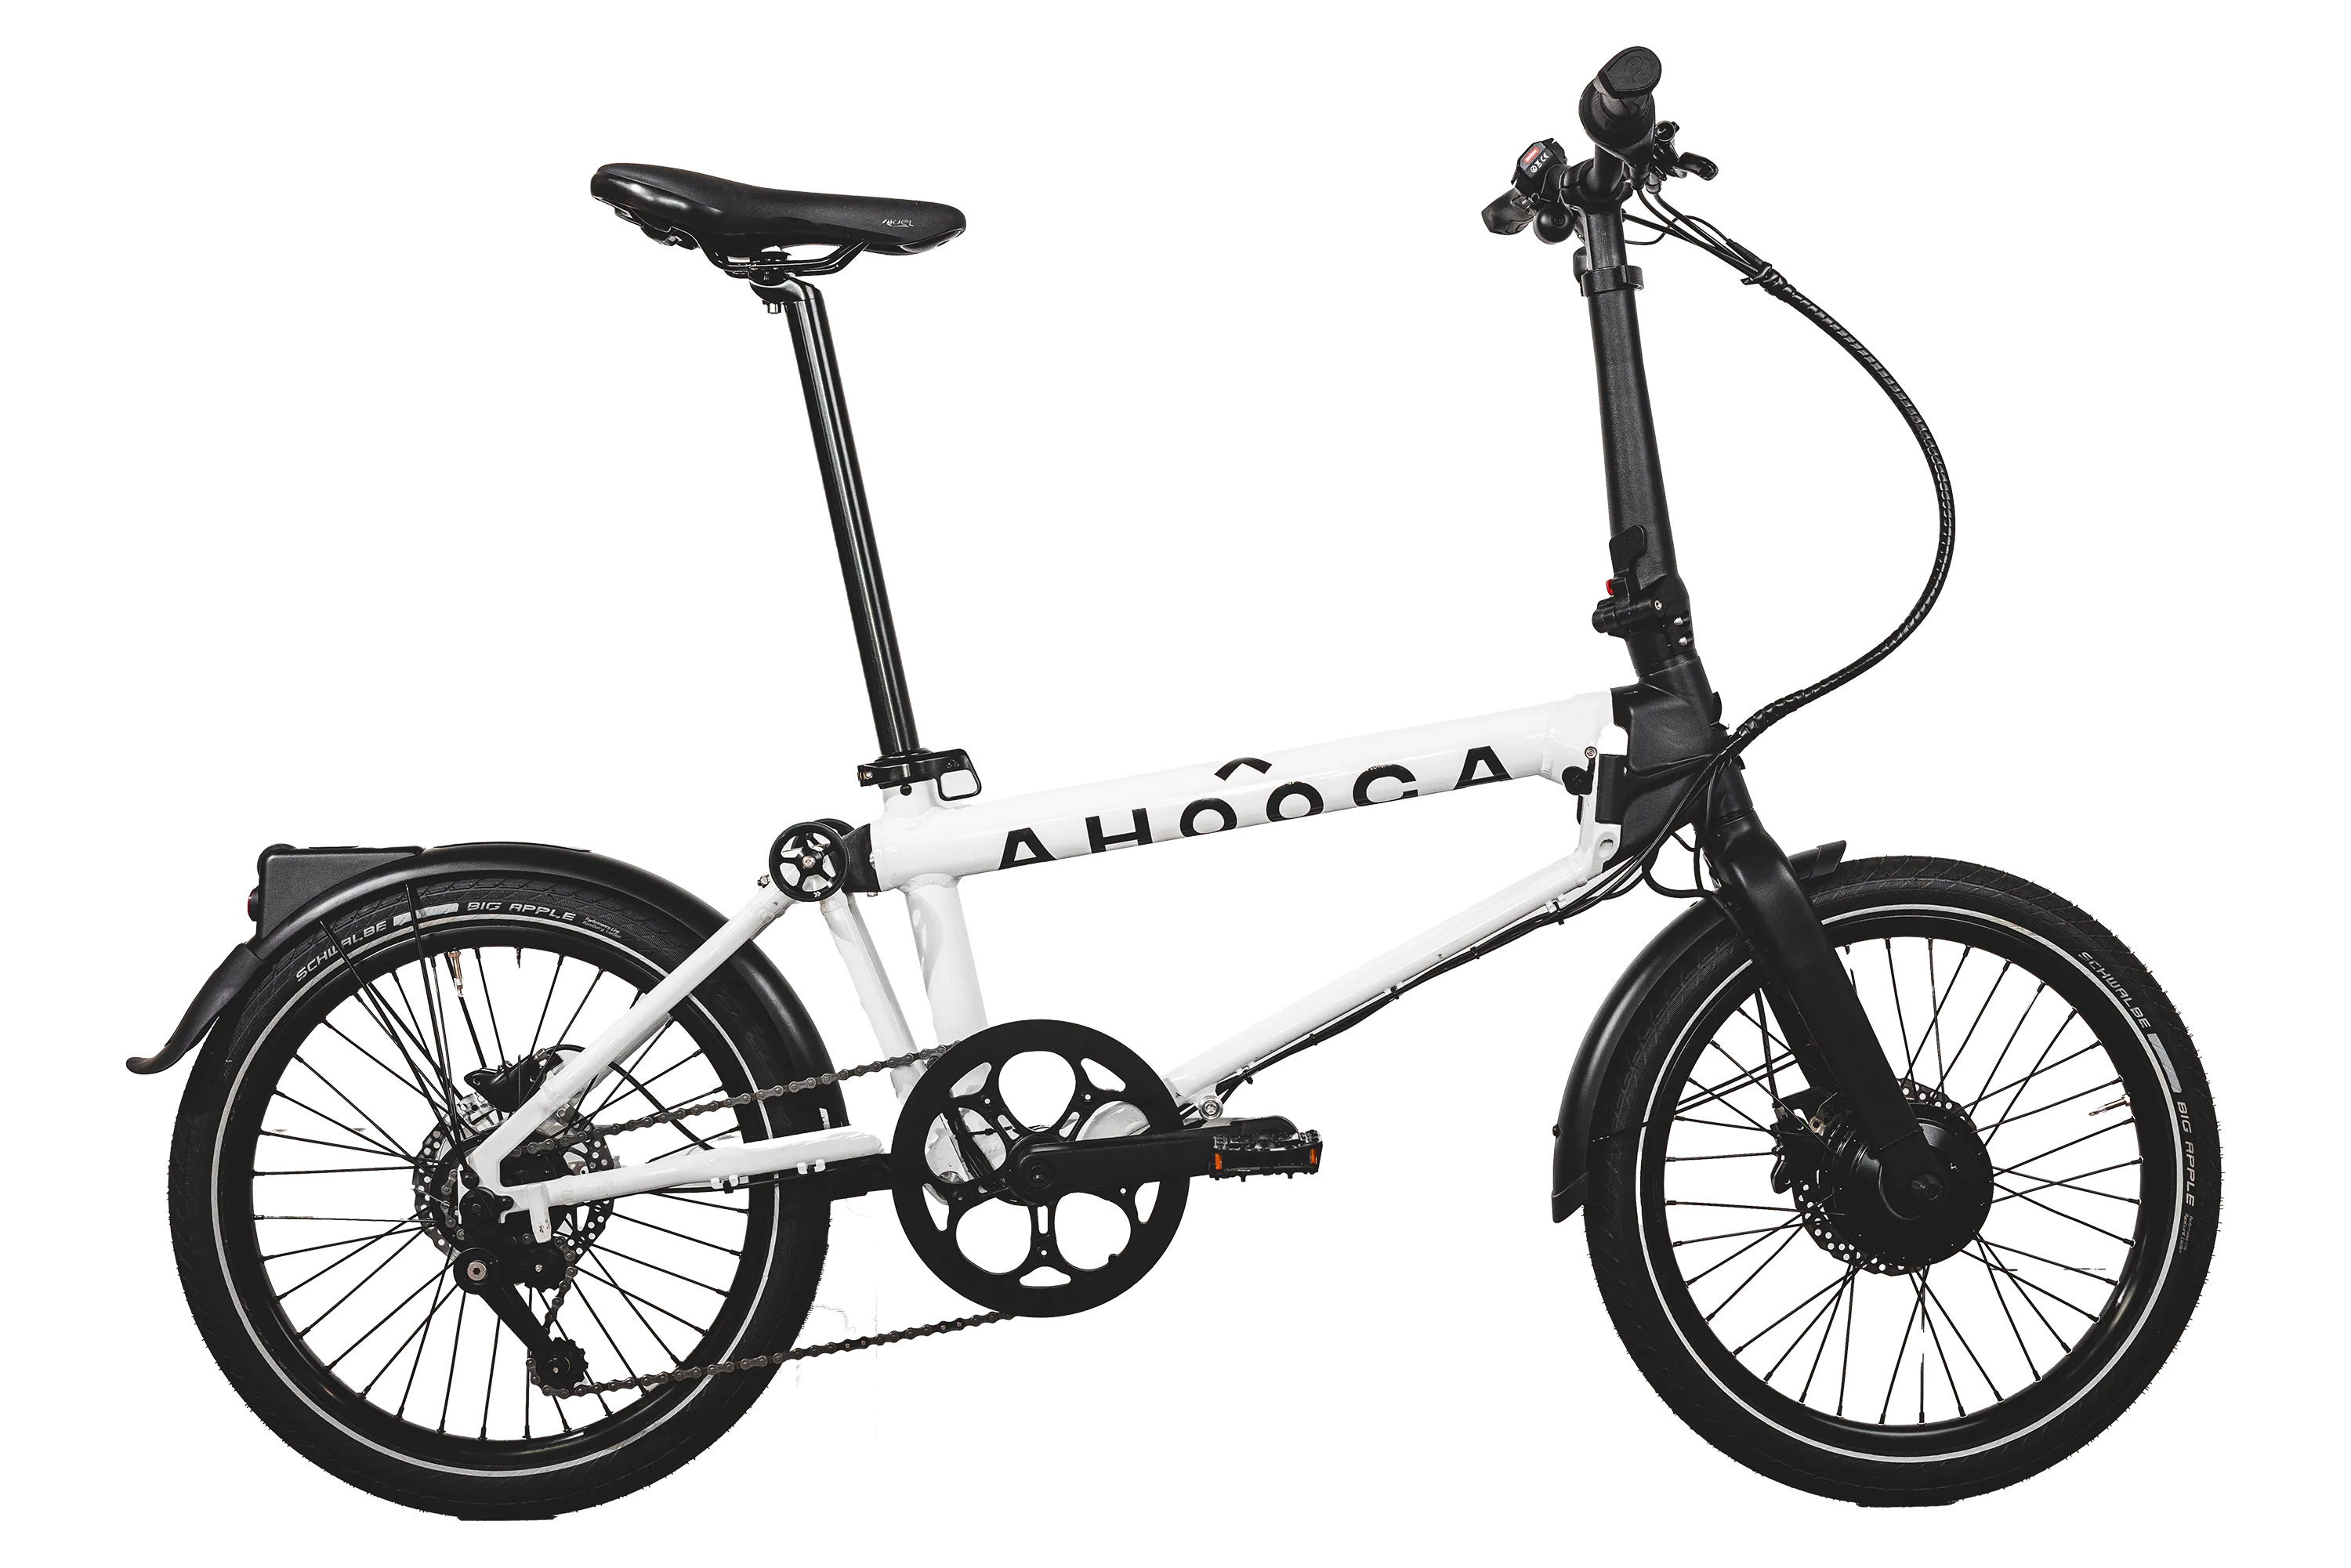 A product image of the Ahooga Max folding electric bike showing the right side of the bike. The bike frame is white with black accents. The Ahooga Max folding electric bike is available to buy from Bleeper.